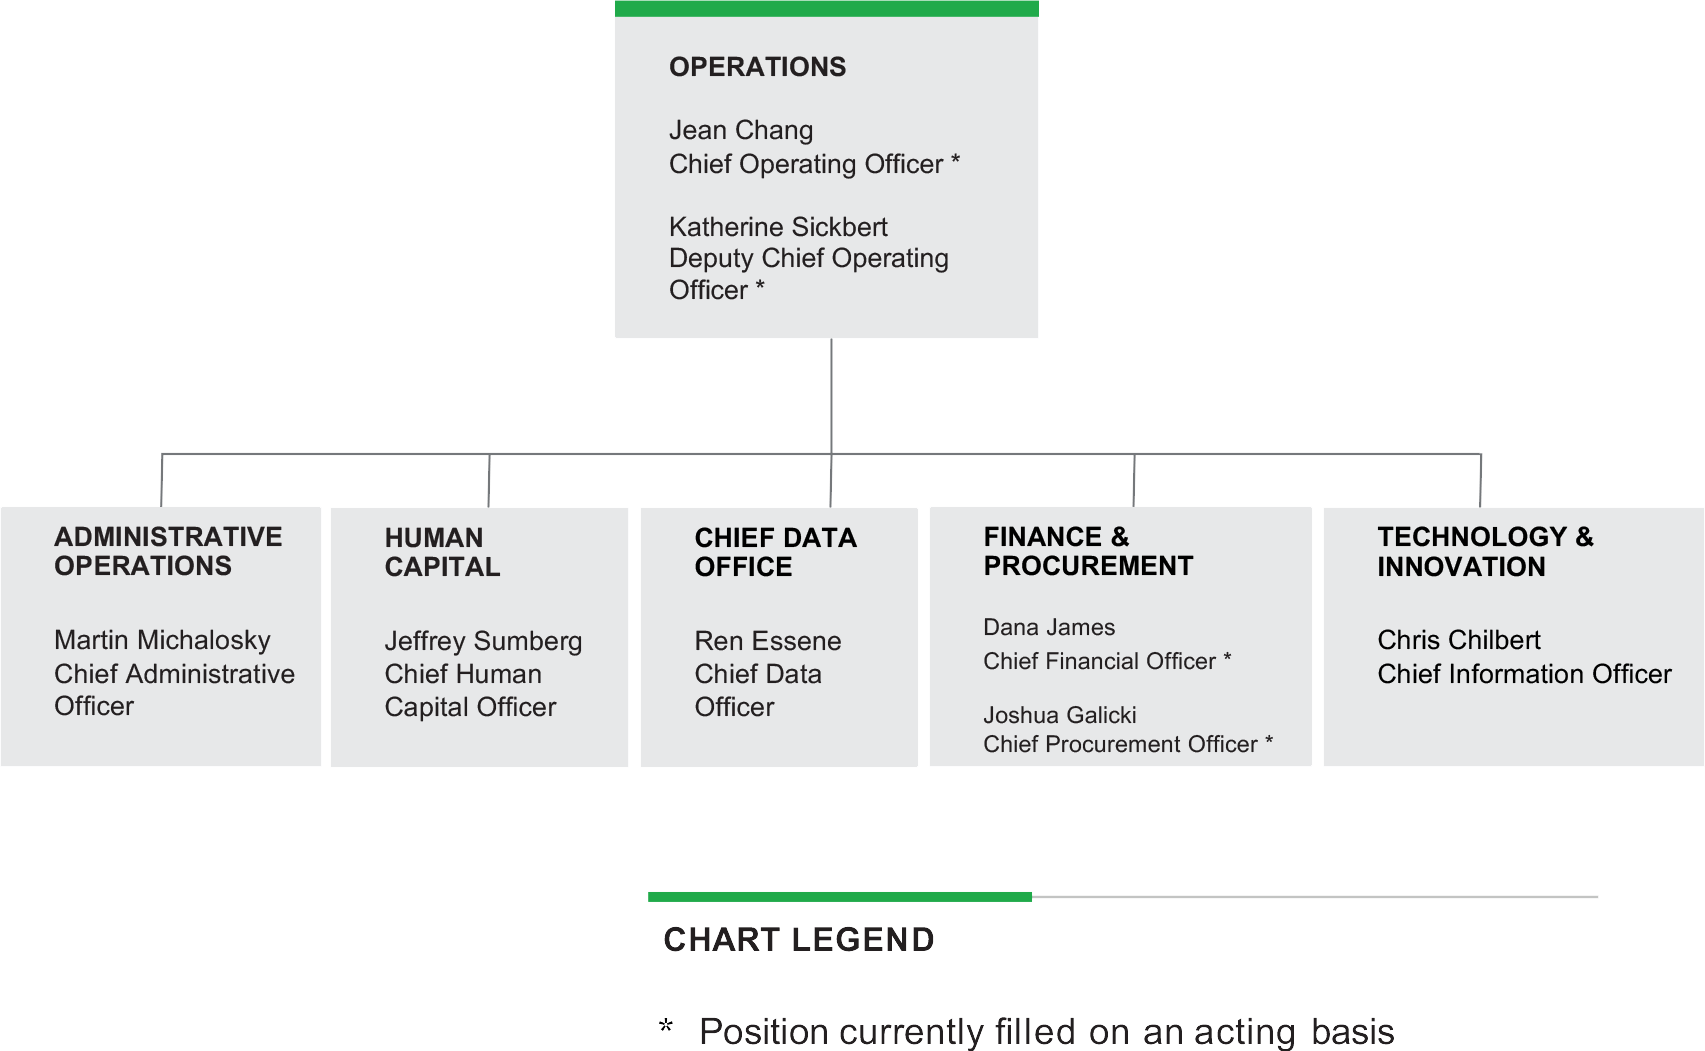 Organizational chart of the Operations division